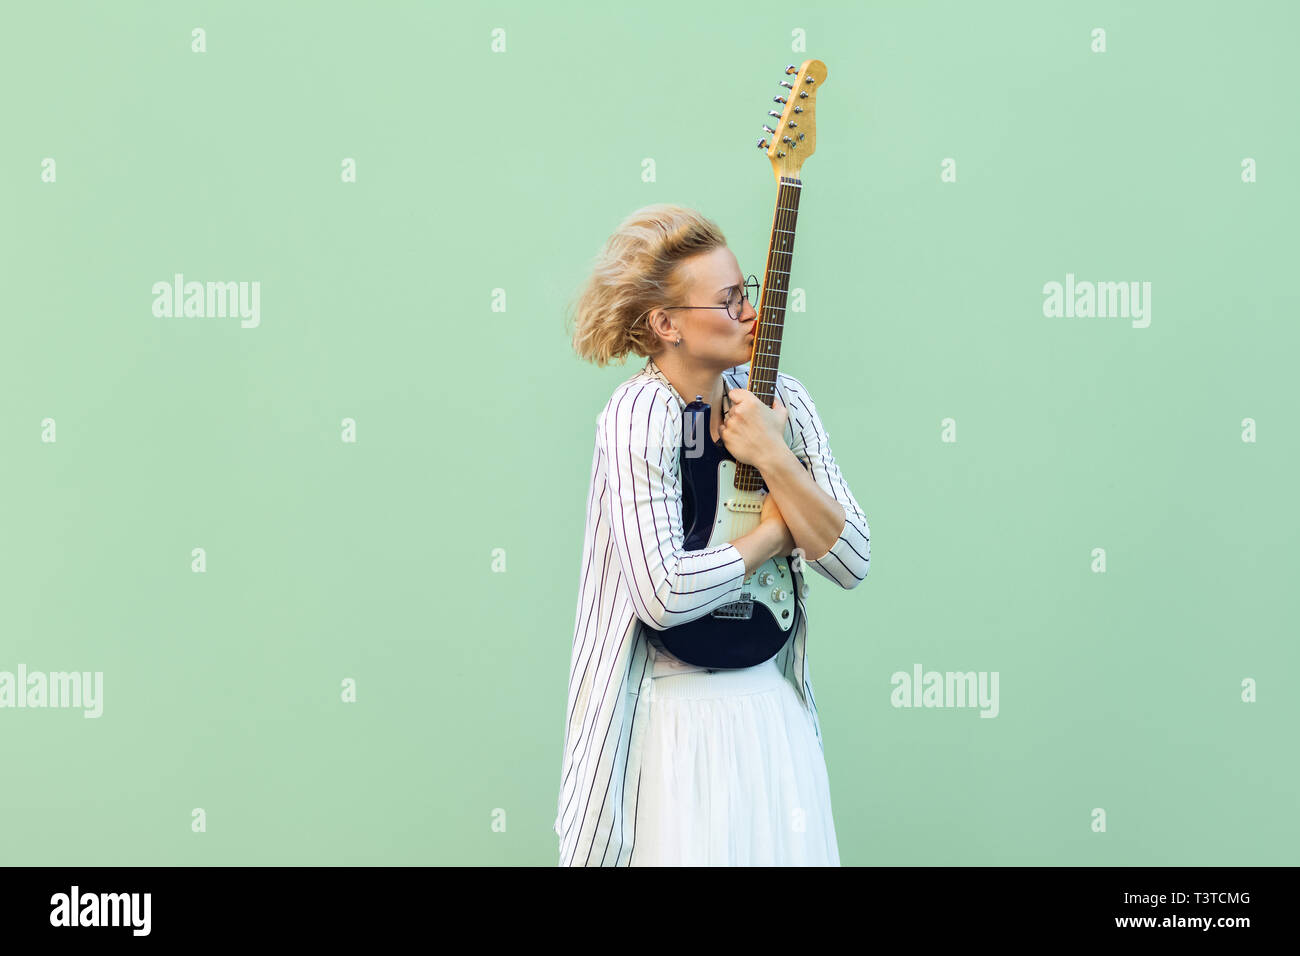 Portrait of young blonde woman in white shirt, skirt, and striped blouse with eyeglasses standing, holding and kissing her lovely electric guitar. ind Stock Photo